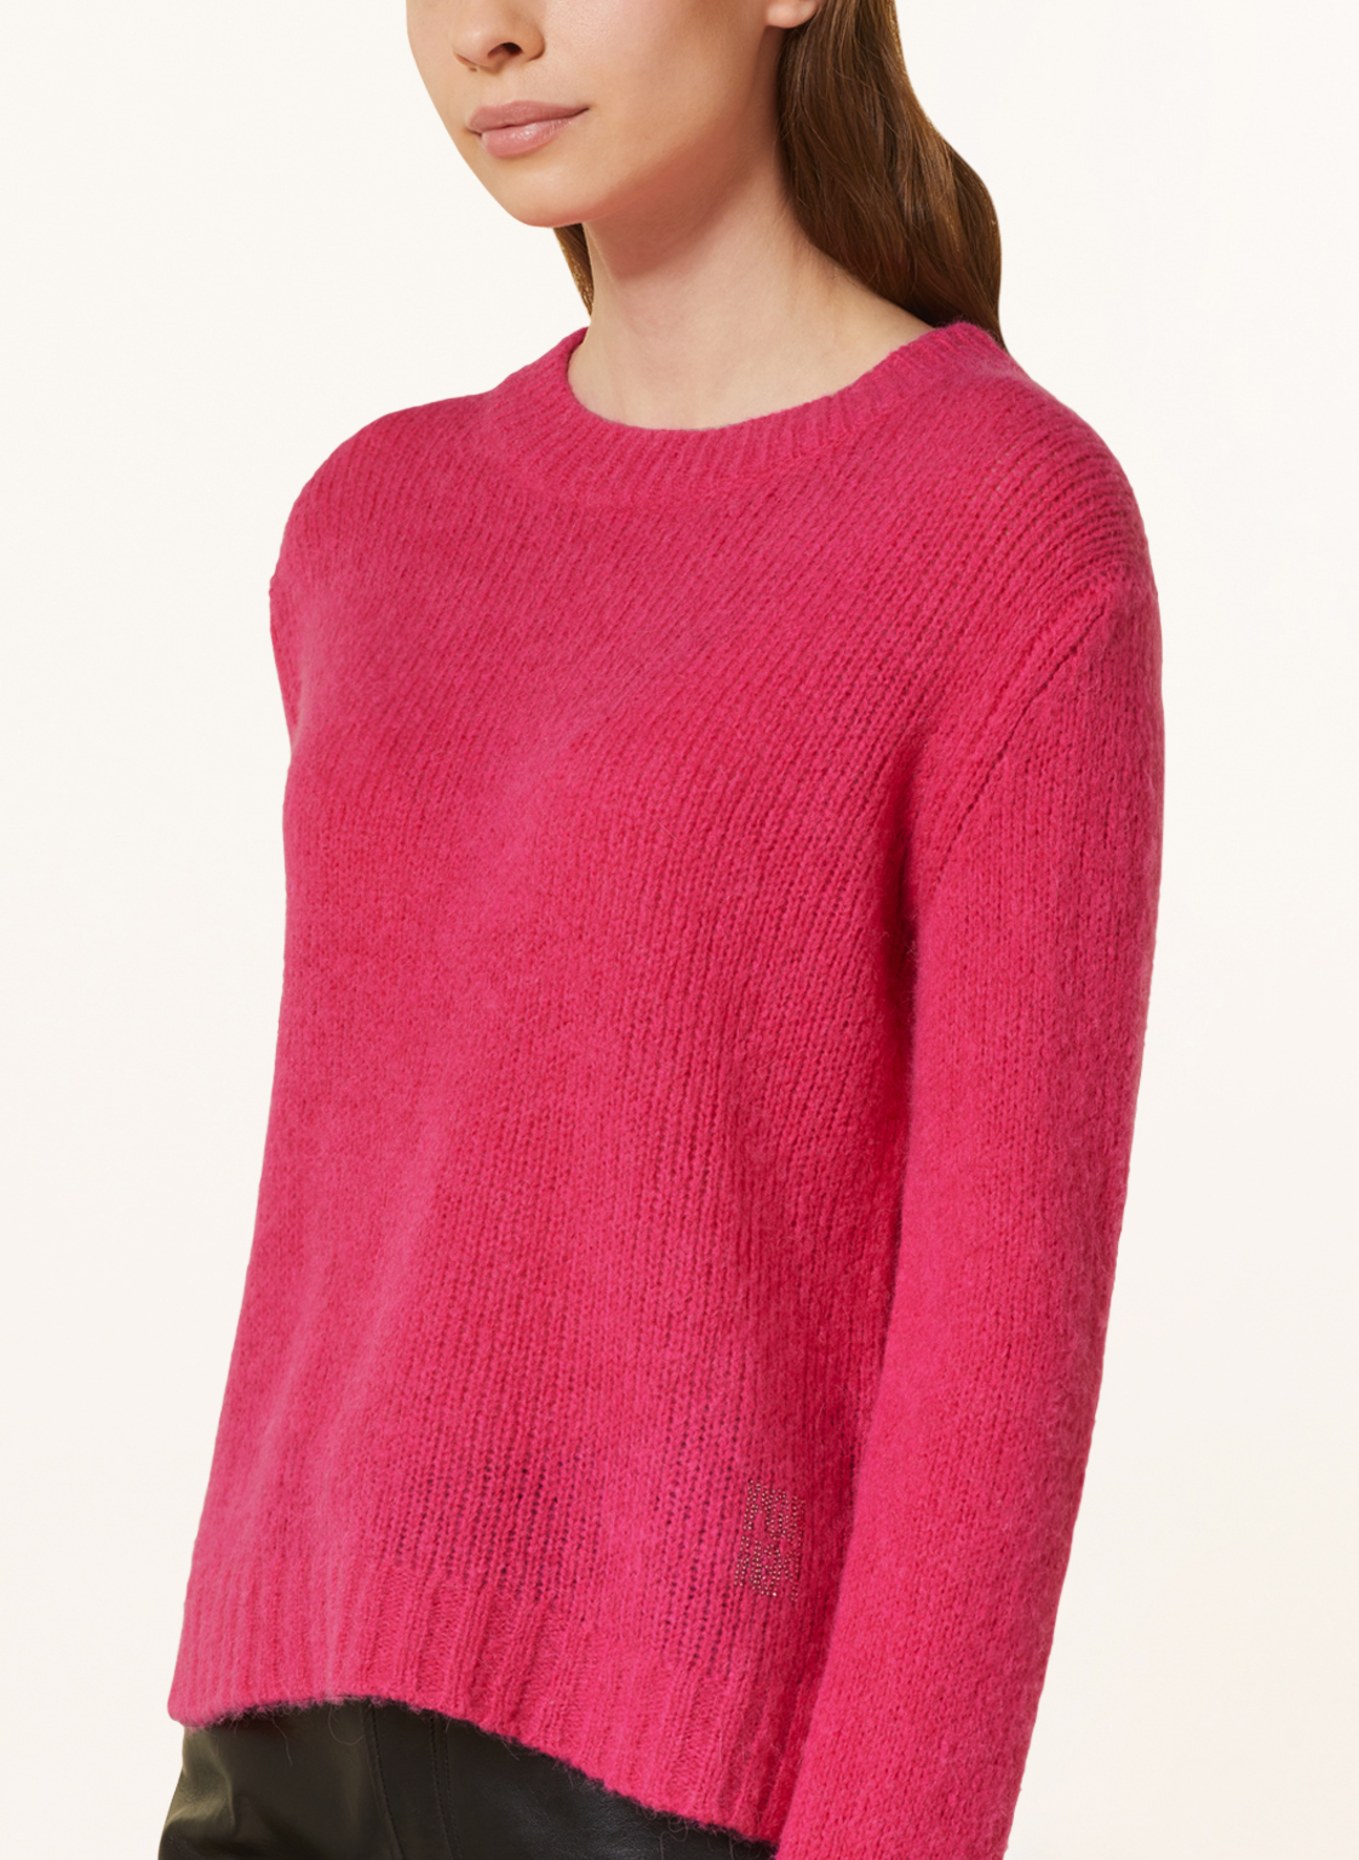 Princess GOES HOLLYWOOD Oversized sweater, Color: PINK (Image 4)